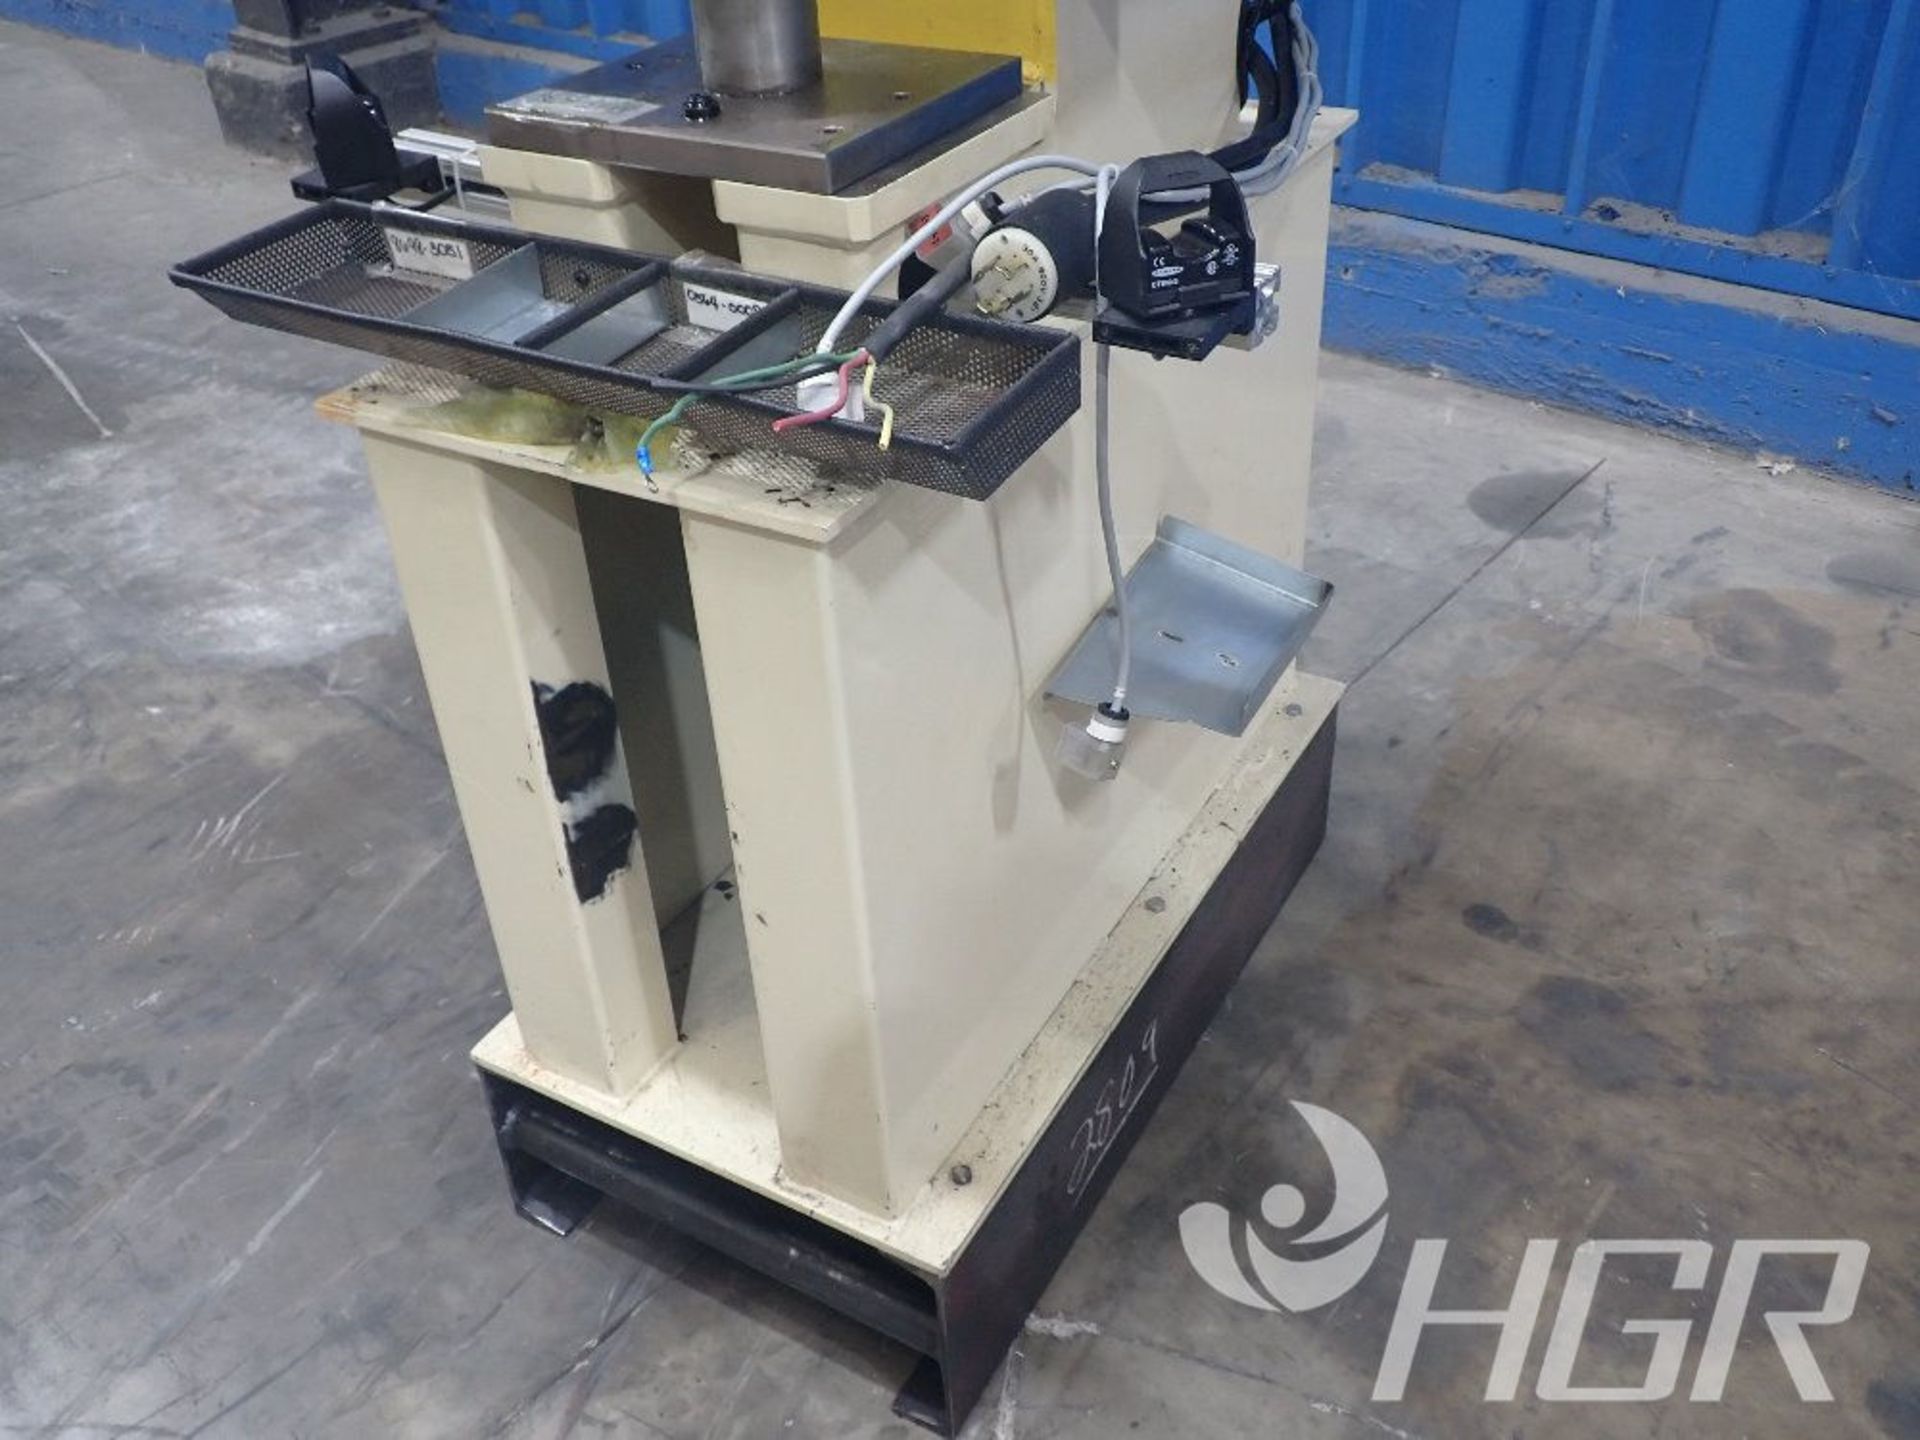 MULTIPRESS PRESS, Model W6A-3, Date: n/a; s/n M-4895, Approx. Capacity: n/a, Power: 3/60/460, - Image 7 of 20